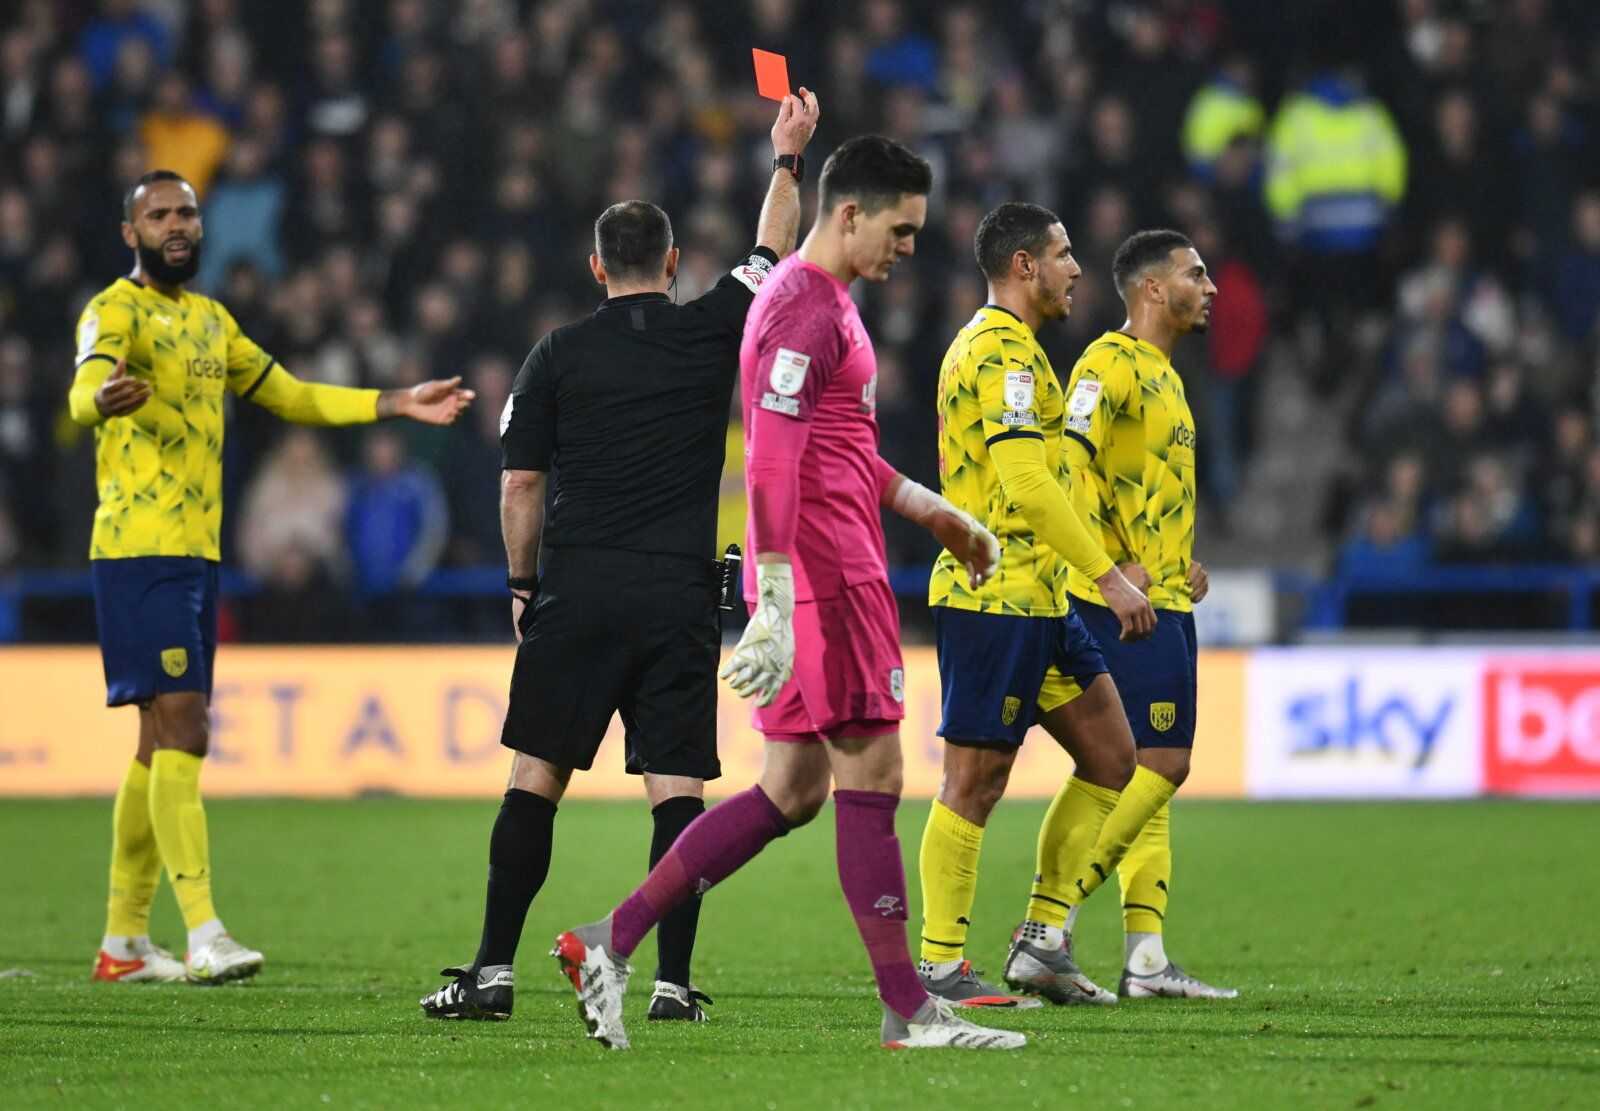 Soccer Football - Championship - Huddersfield Town v West Bromwich Albion - John Smith's Stadium, Huddersfield, Britain - November 20, 2021 West Bromwich Albion's Jake Livermore is shown the red card by referee Tim Robinson Paul Burrows/Action Images